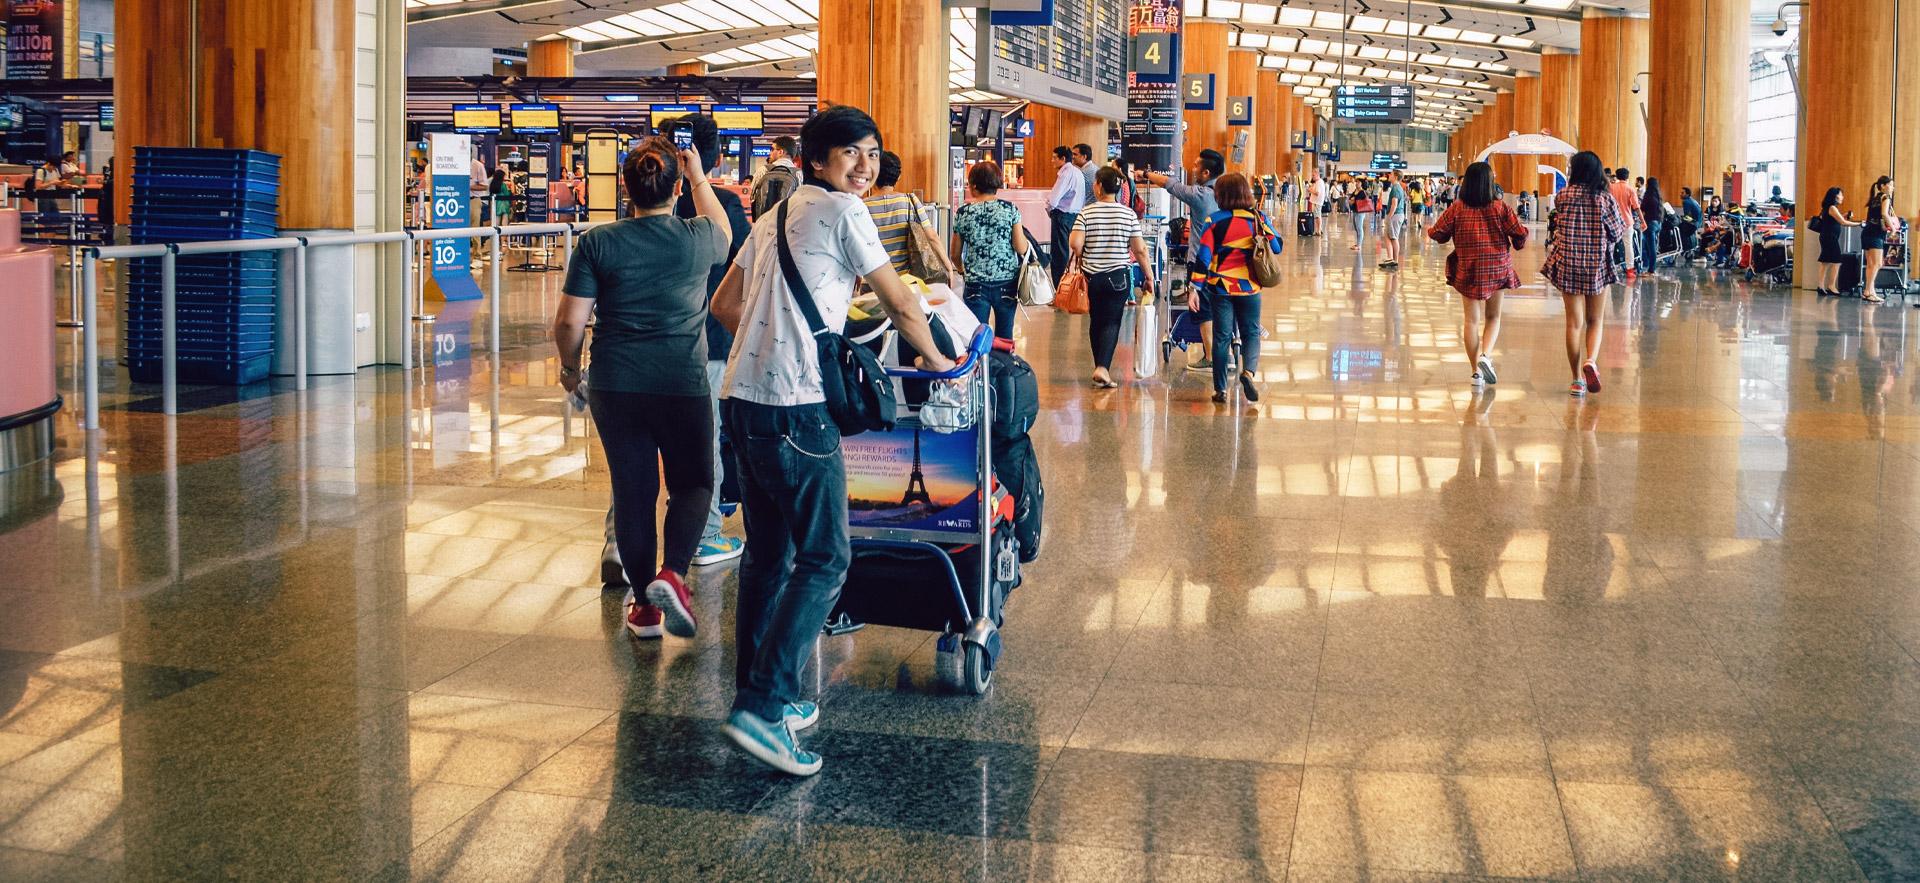 inside an airport showing people walking around and one young adult pushing a luggage cart and looking back smiling at the camera